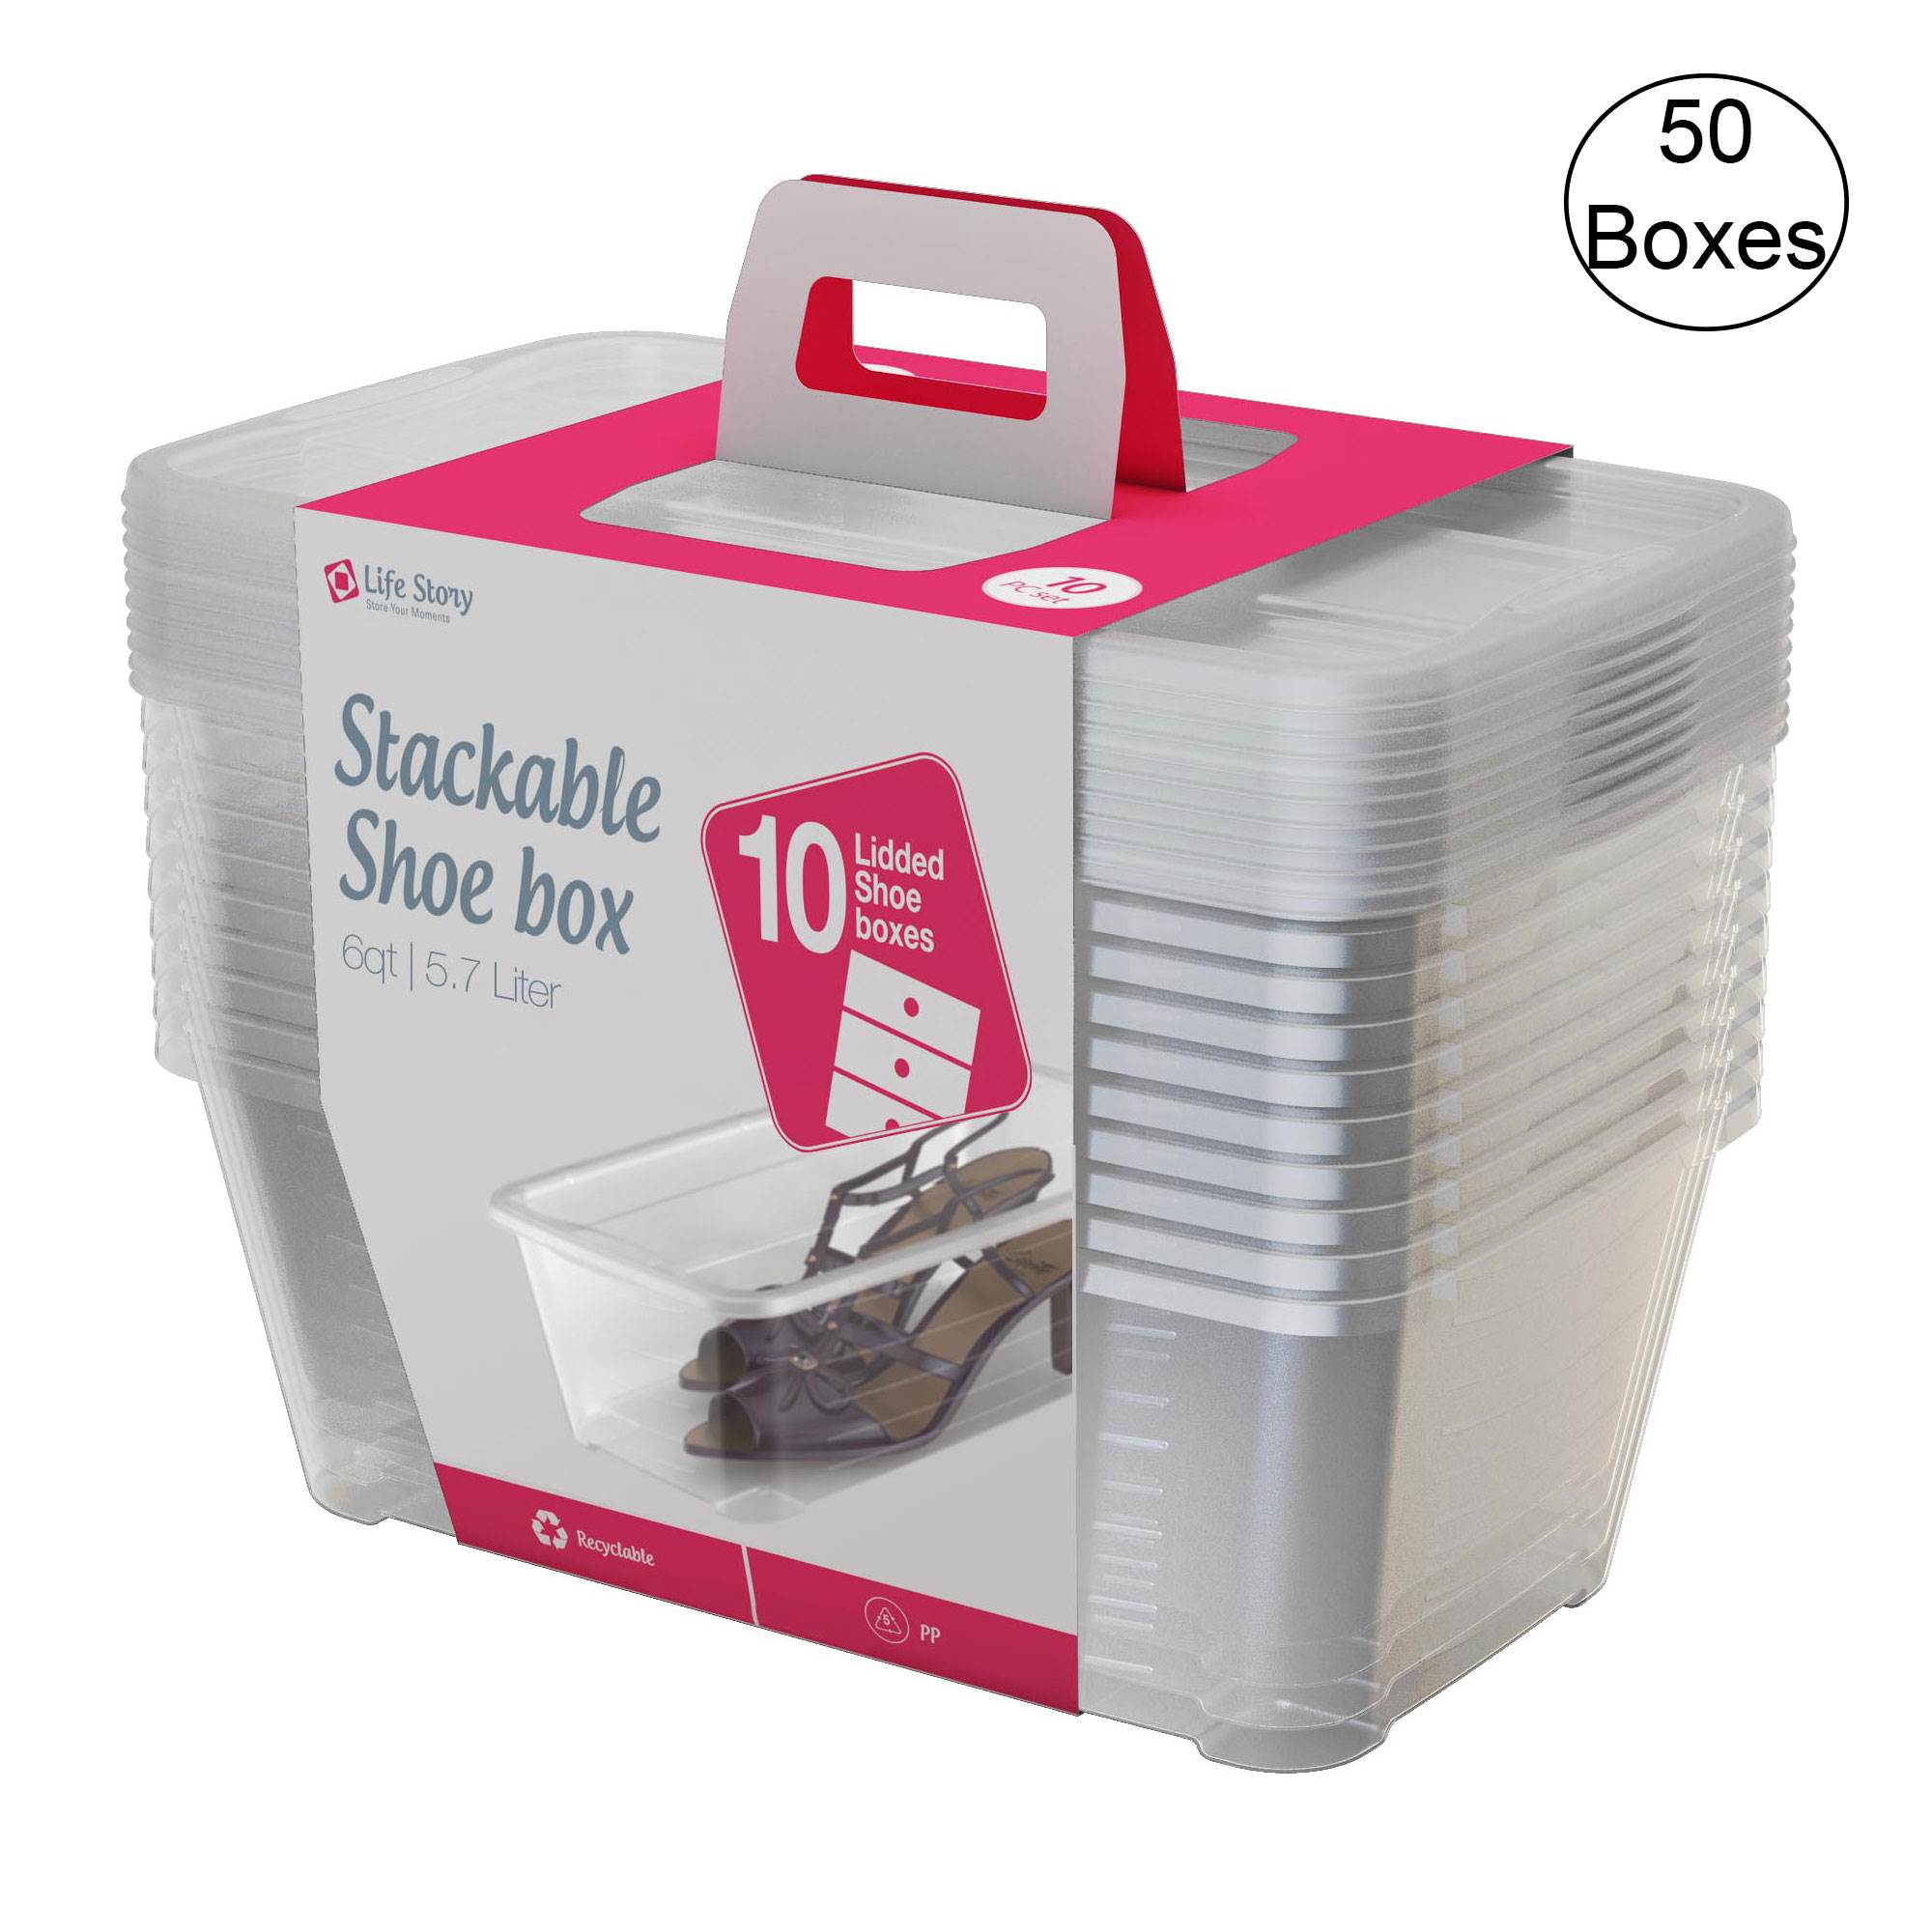 Life Story Clear 6-Quart Storage Bins with Red Lids, 6-Pack